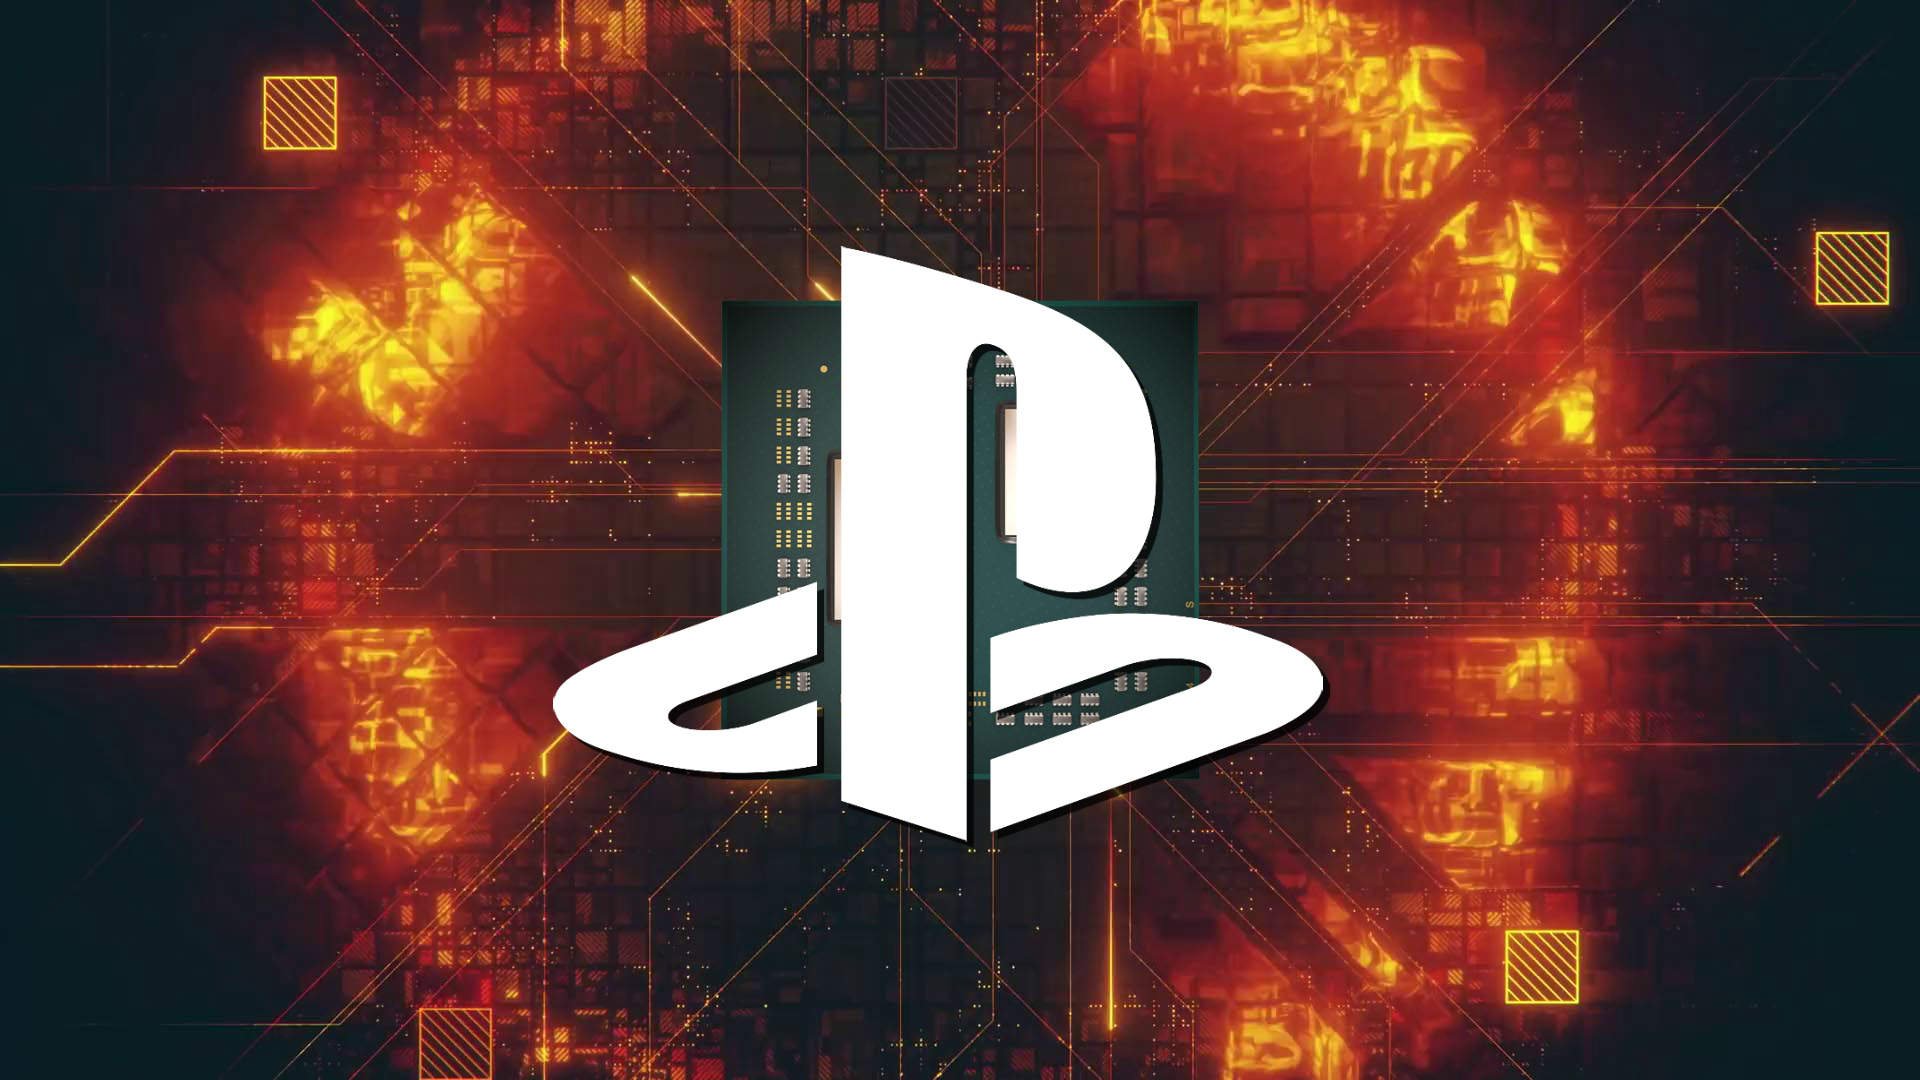 Sony to hold another PS5 event on June 4